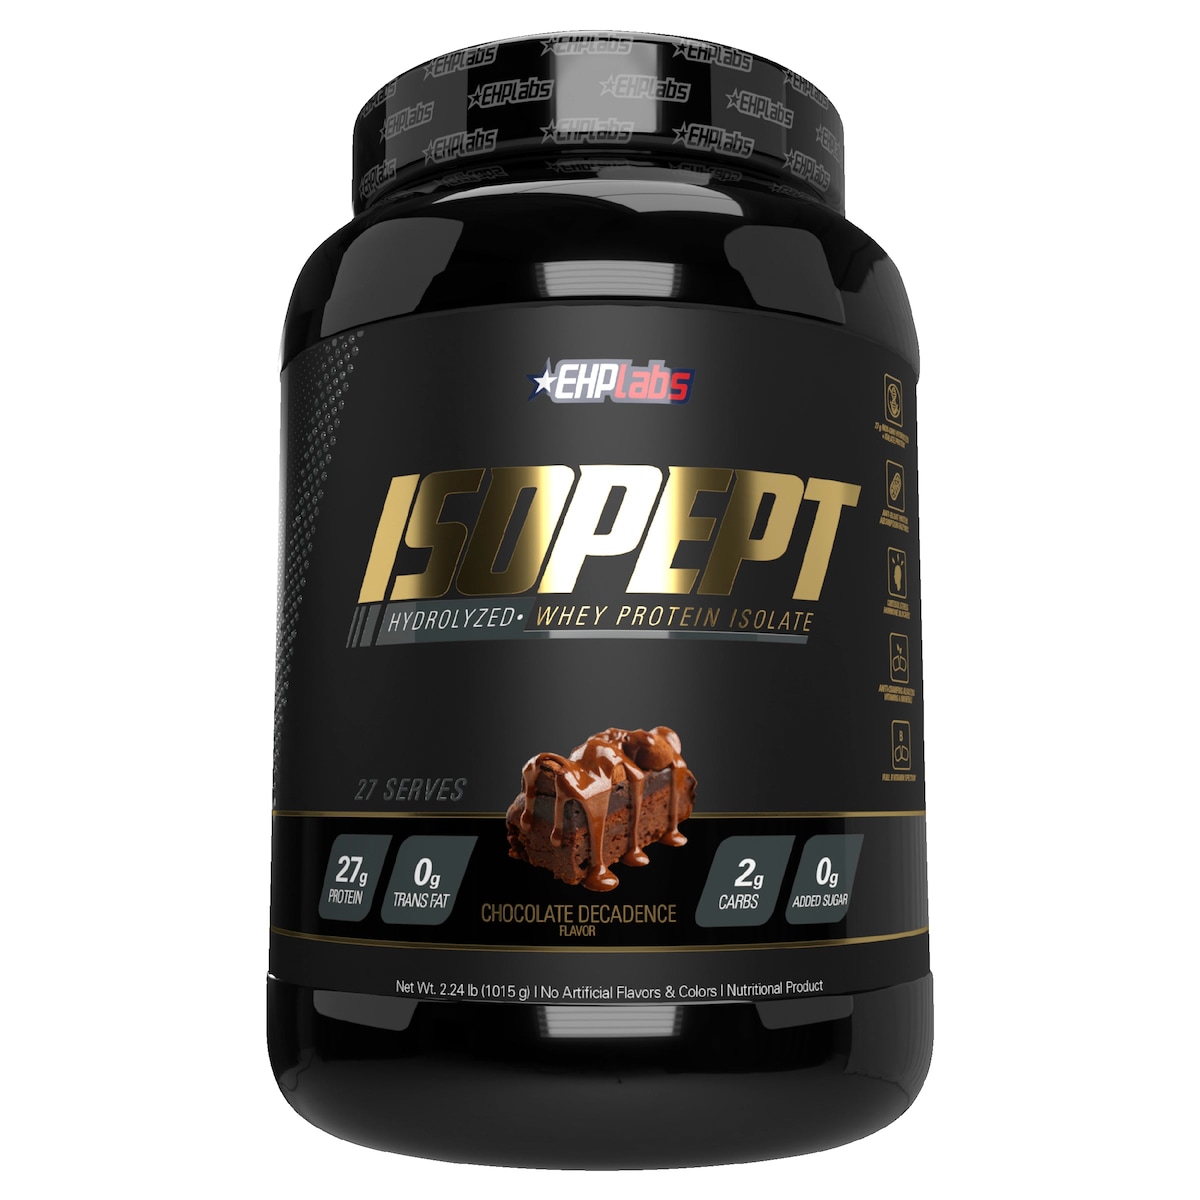 EHPLabs Isopept Hydrolyzed Whey Protein Delicious Chocolate 1015g